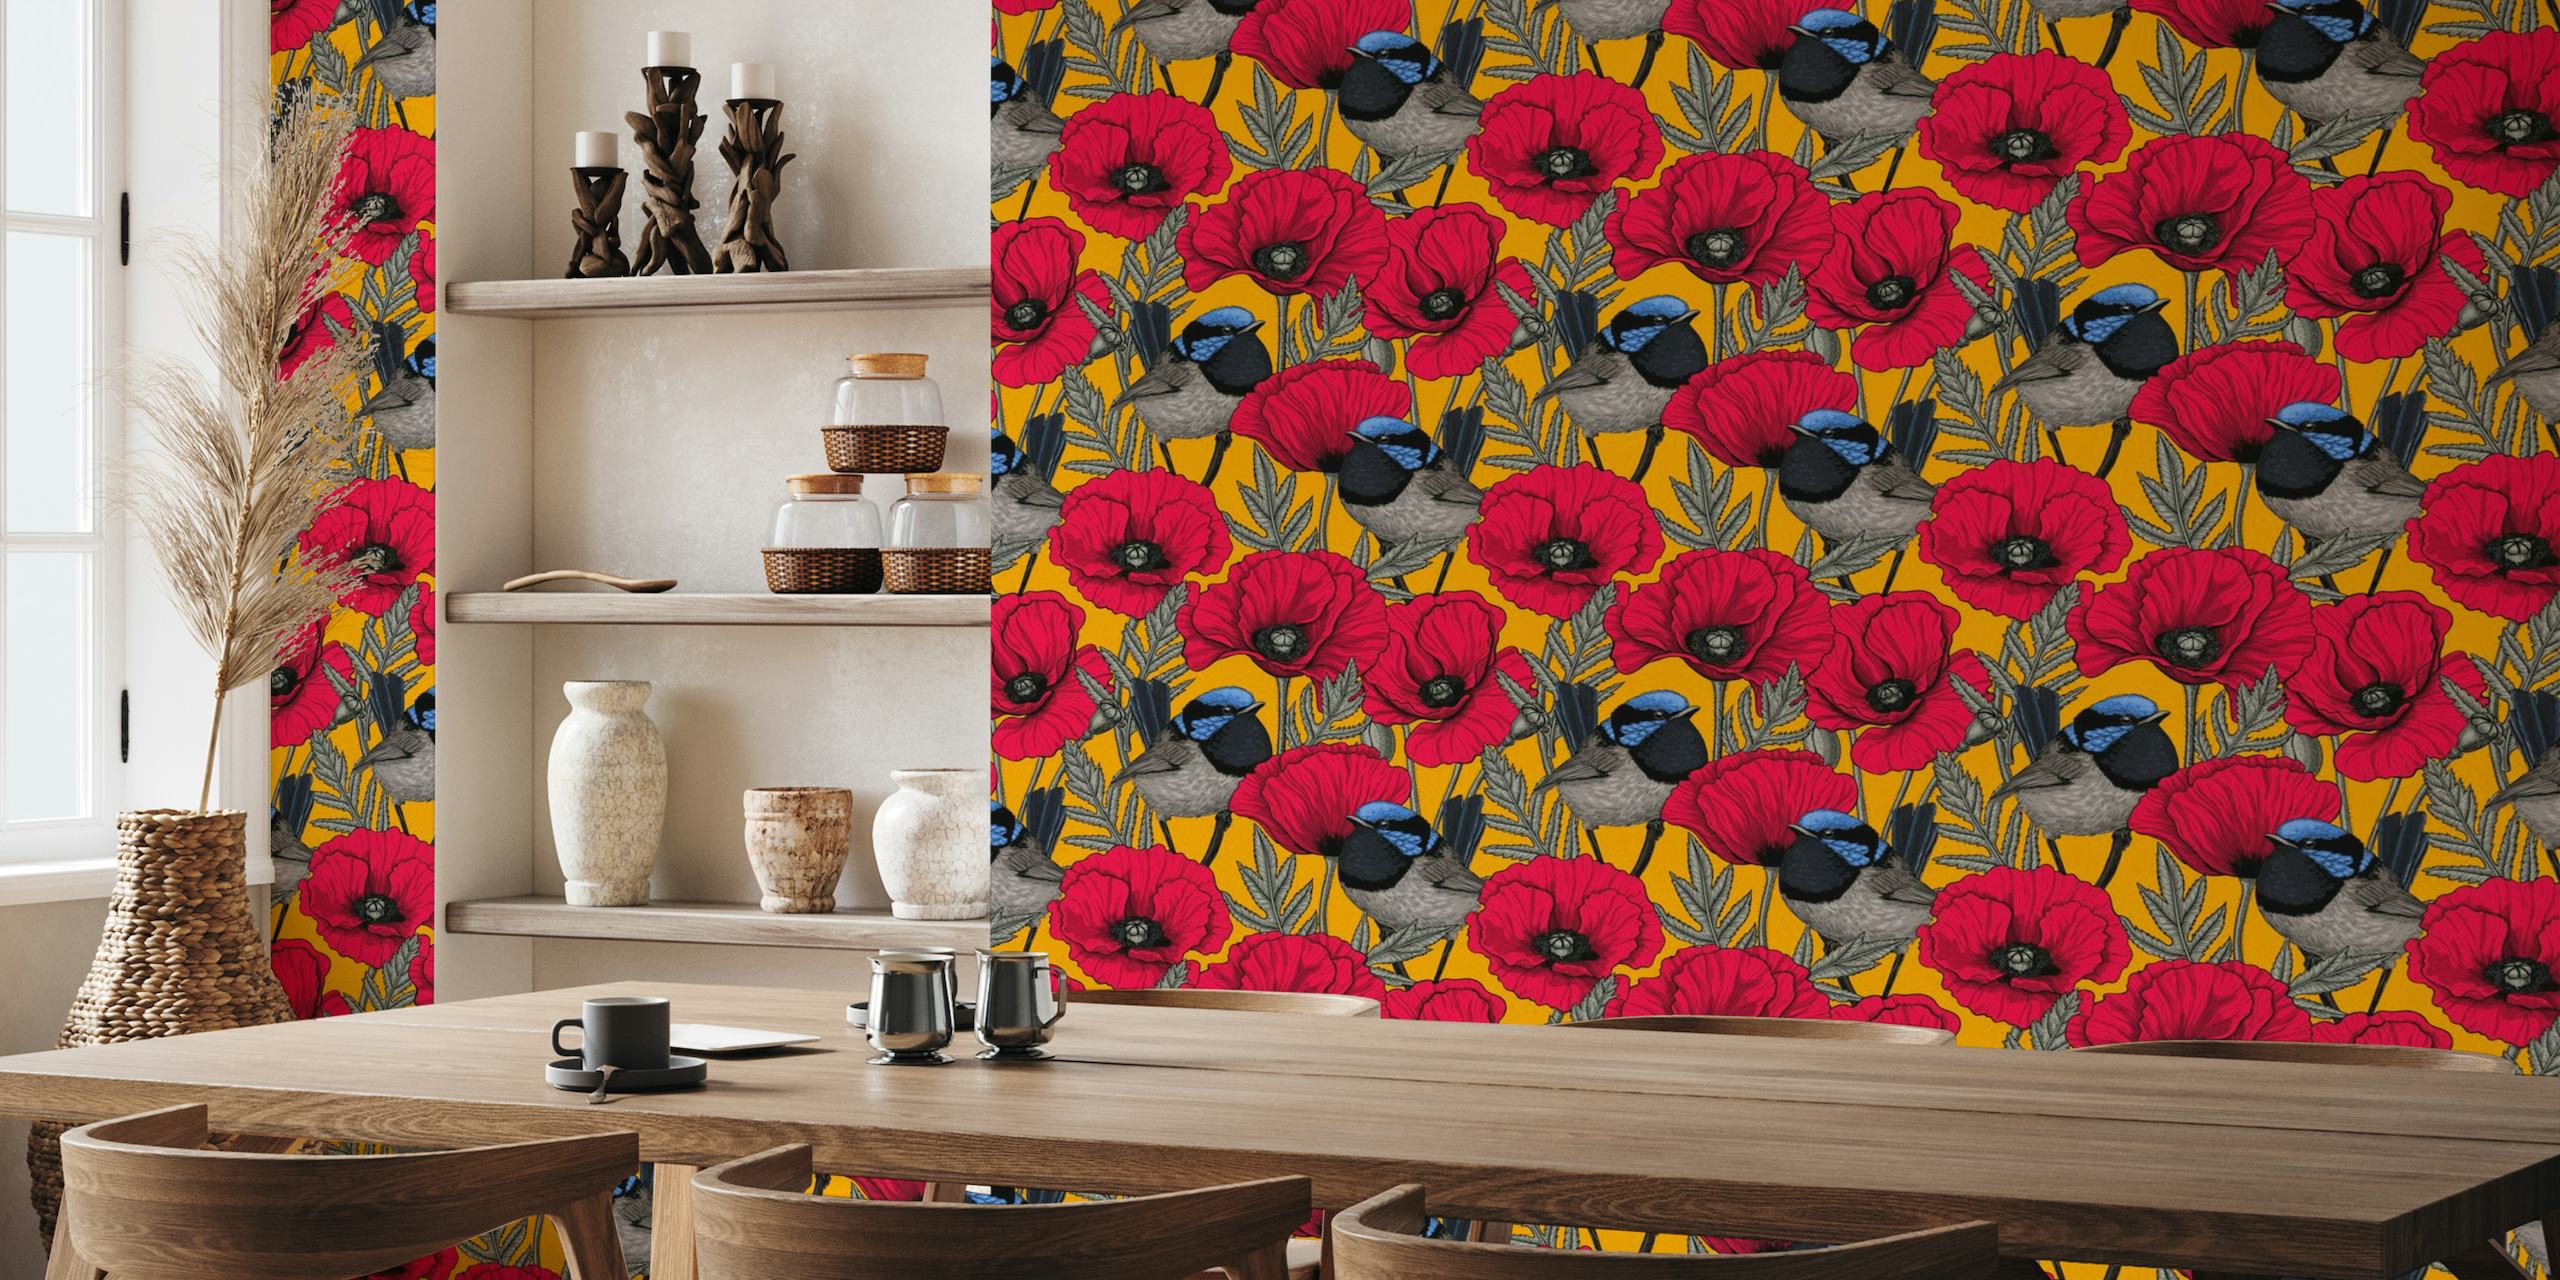 Fairy wrens and red poppies on orange wallpaper